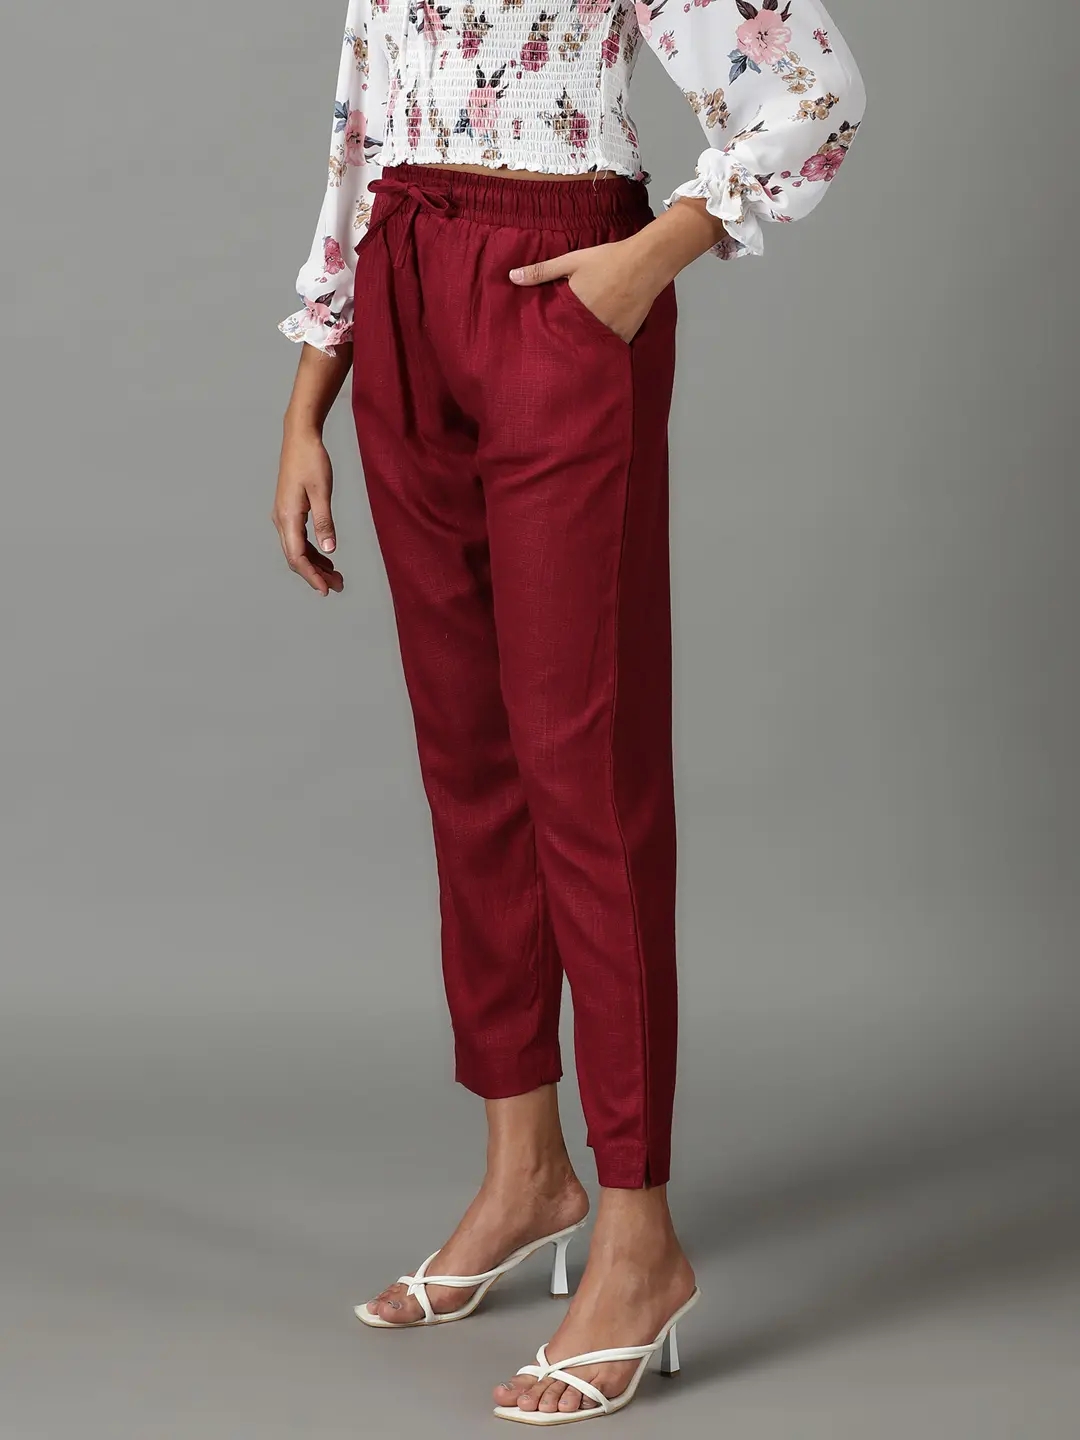 Buy Burgundy Trousers  Pants for Women by Outryt Online  Ajiocom